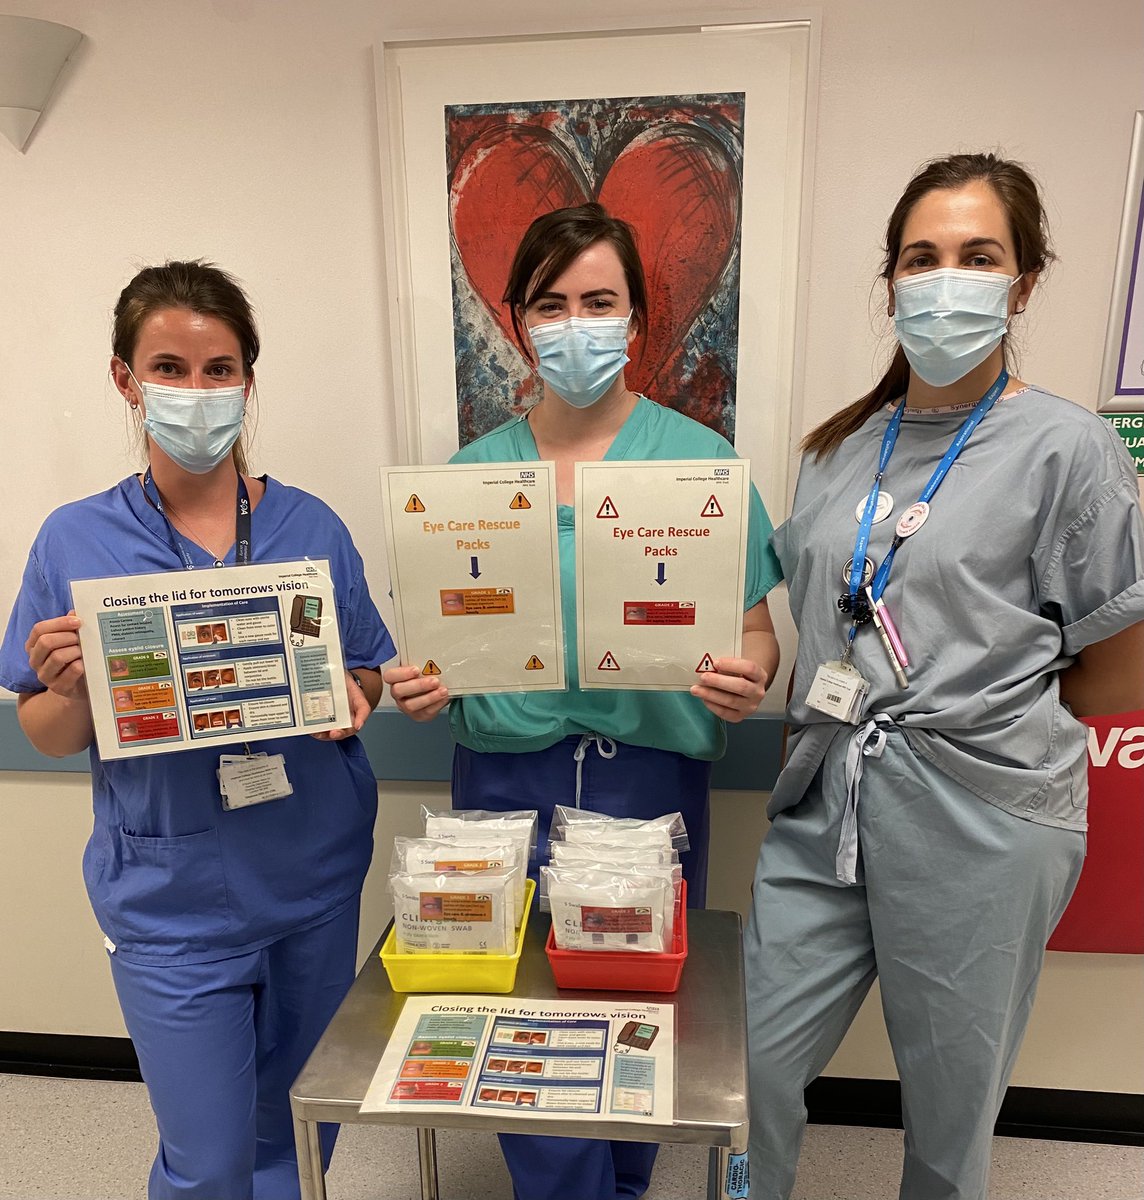 👁 Care link nurses rolling out the Nurse led Eye Care Protocol in Intensive Care @ImperialNHS. Looking forward to seeing this expand across site. #eyecarematters @imogenstringer @CaoimheIcu @imperialqi @Imperialpeople @cleonvillapalos @lindsbenj @BACCNUK